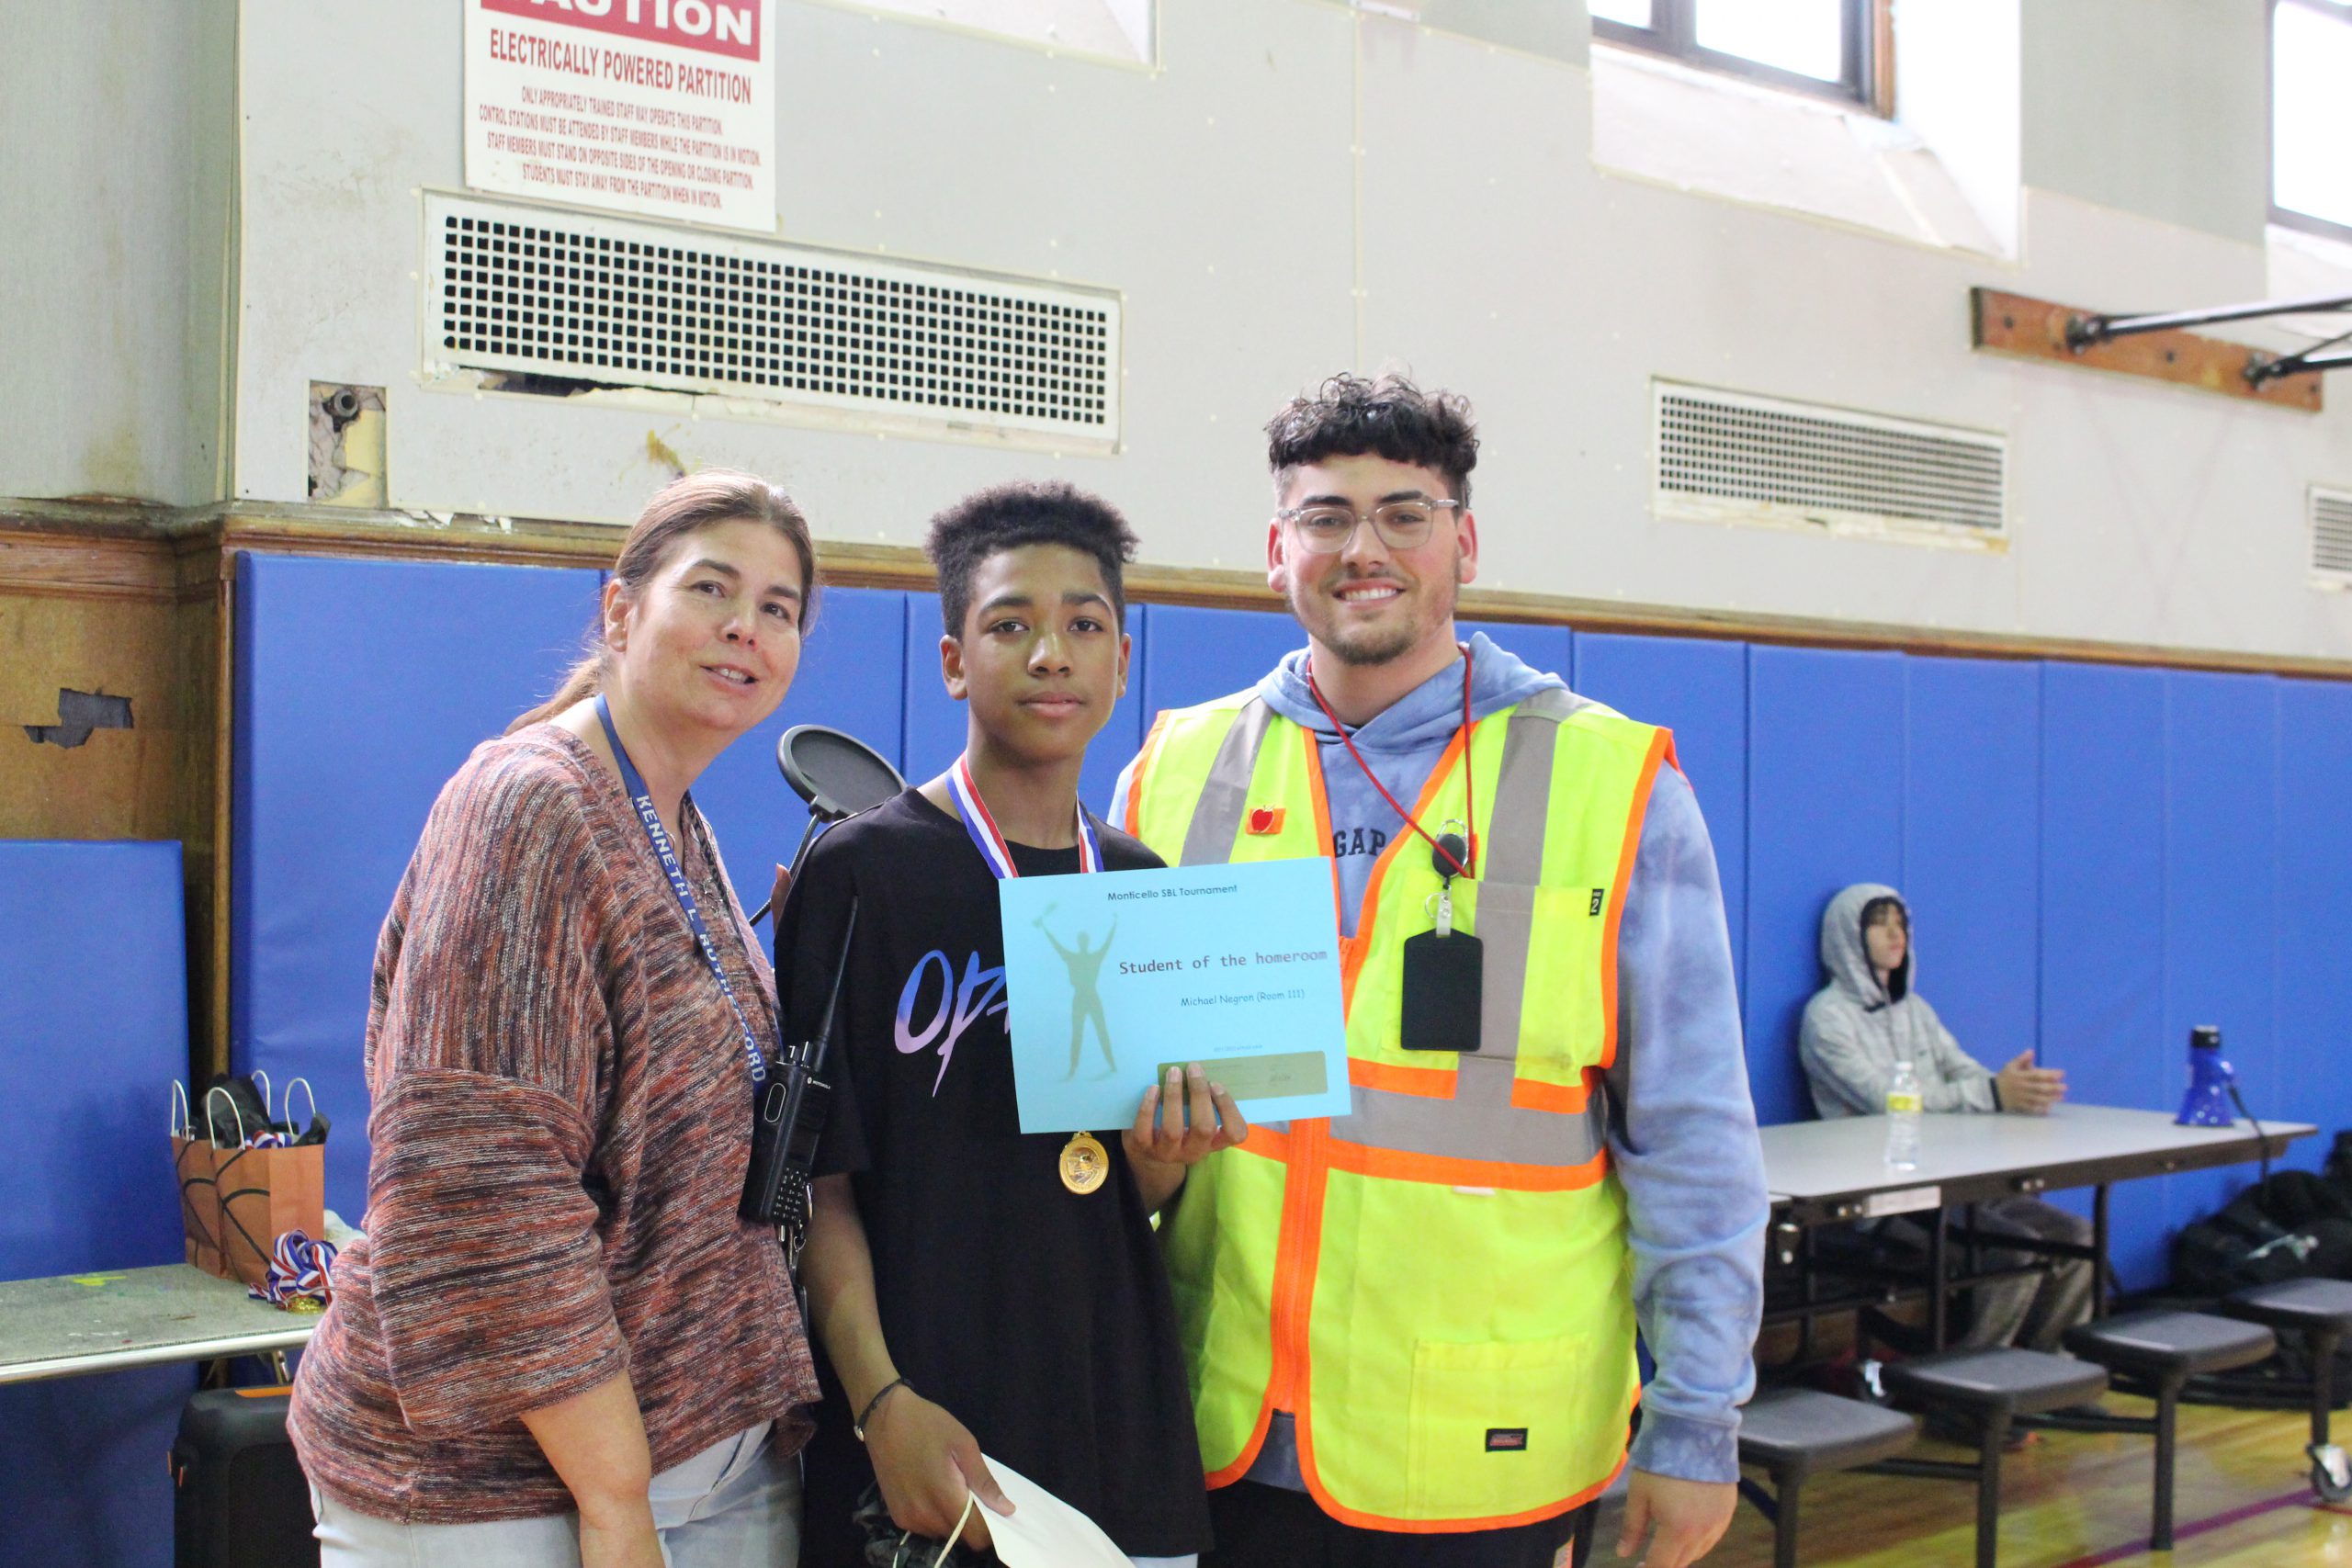 A Monticello staff member with a walkie-talkie around her neck is standing with a security attendant (who's wearing a bright yellow reflective vest) and a student. Everyone is smiling for a picture as the student holds up a certificate.